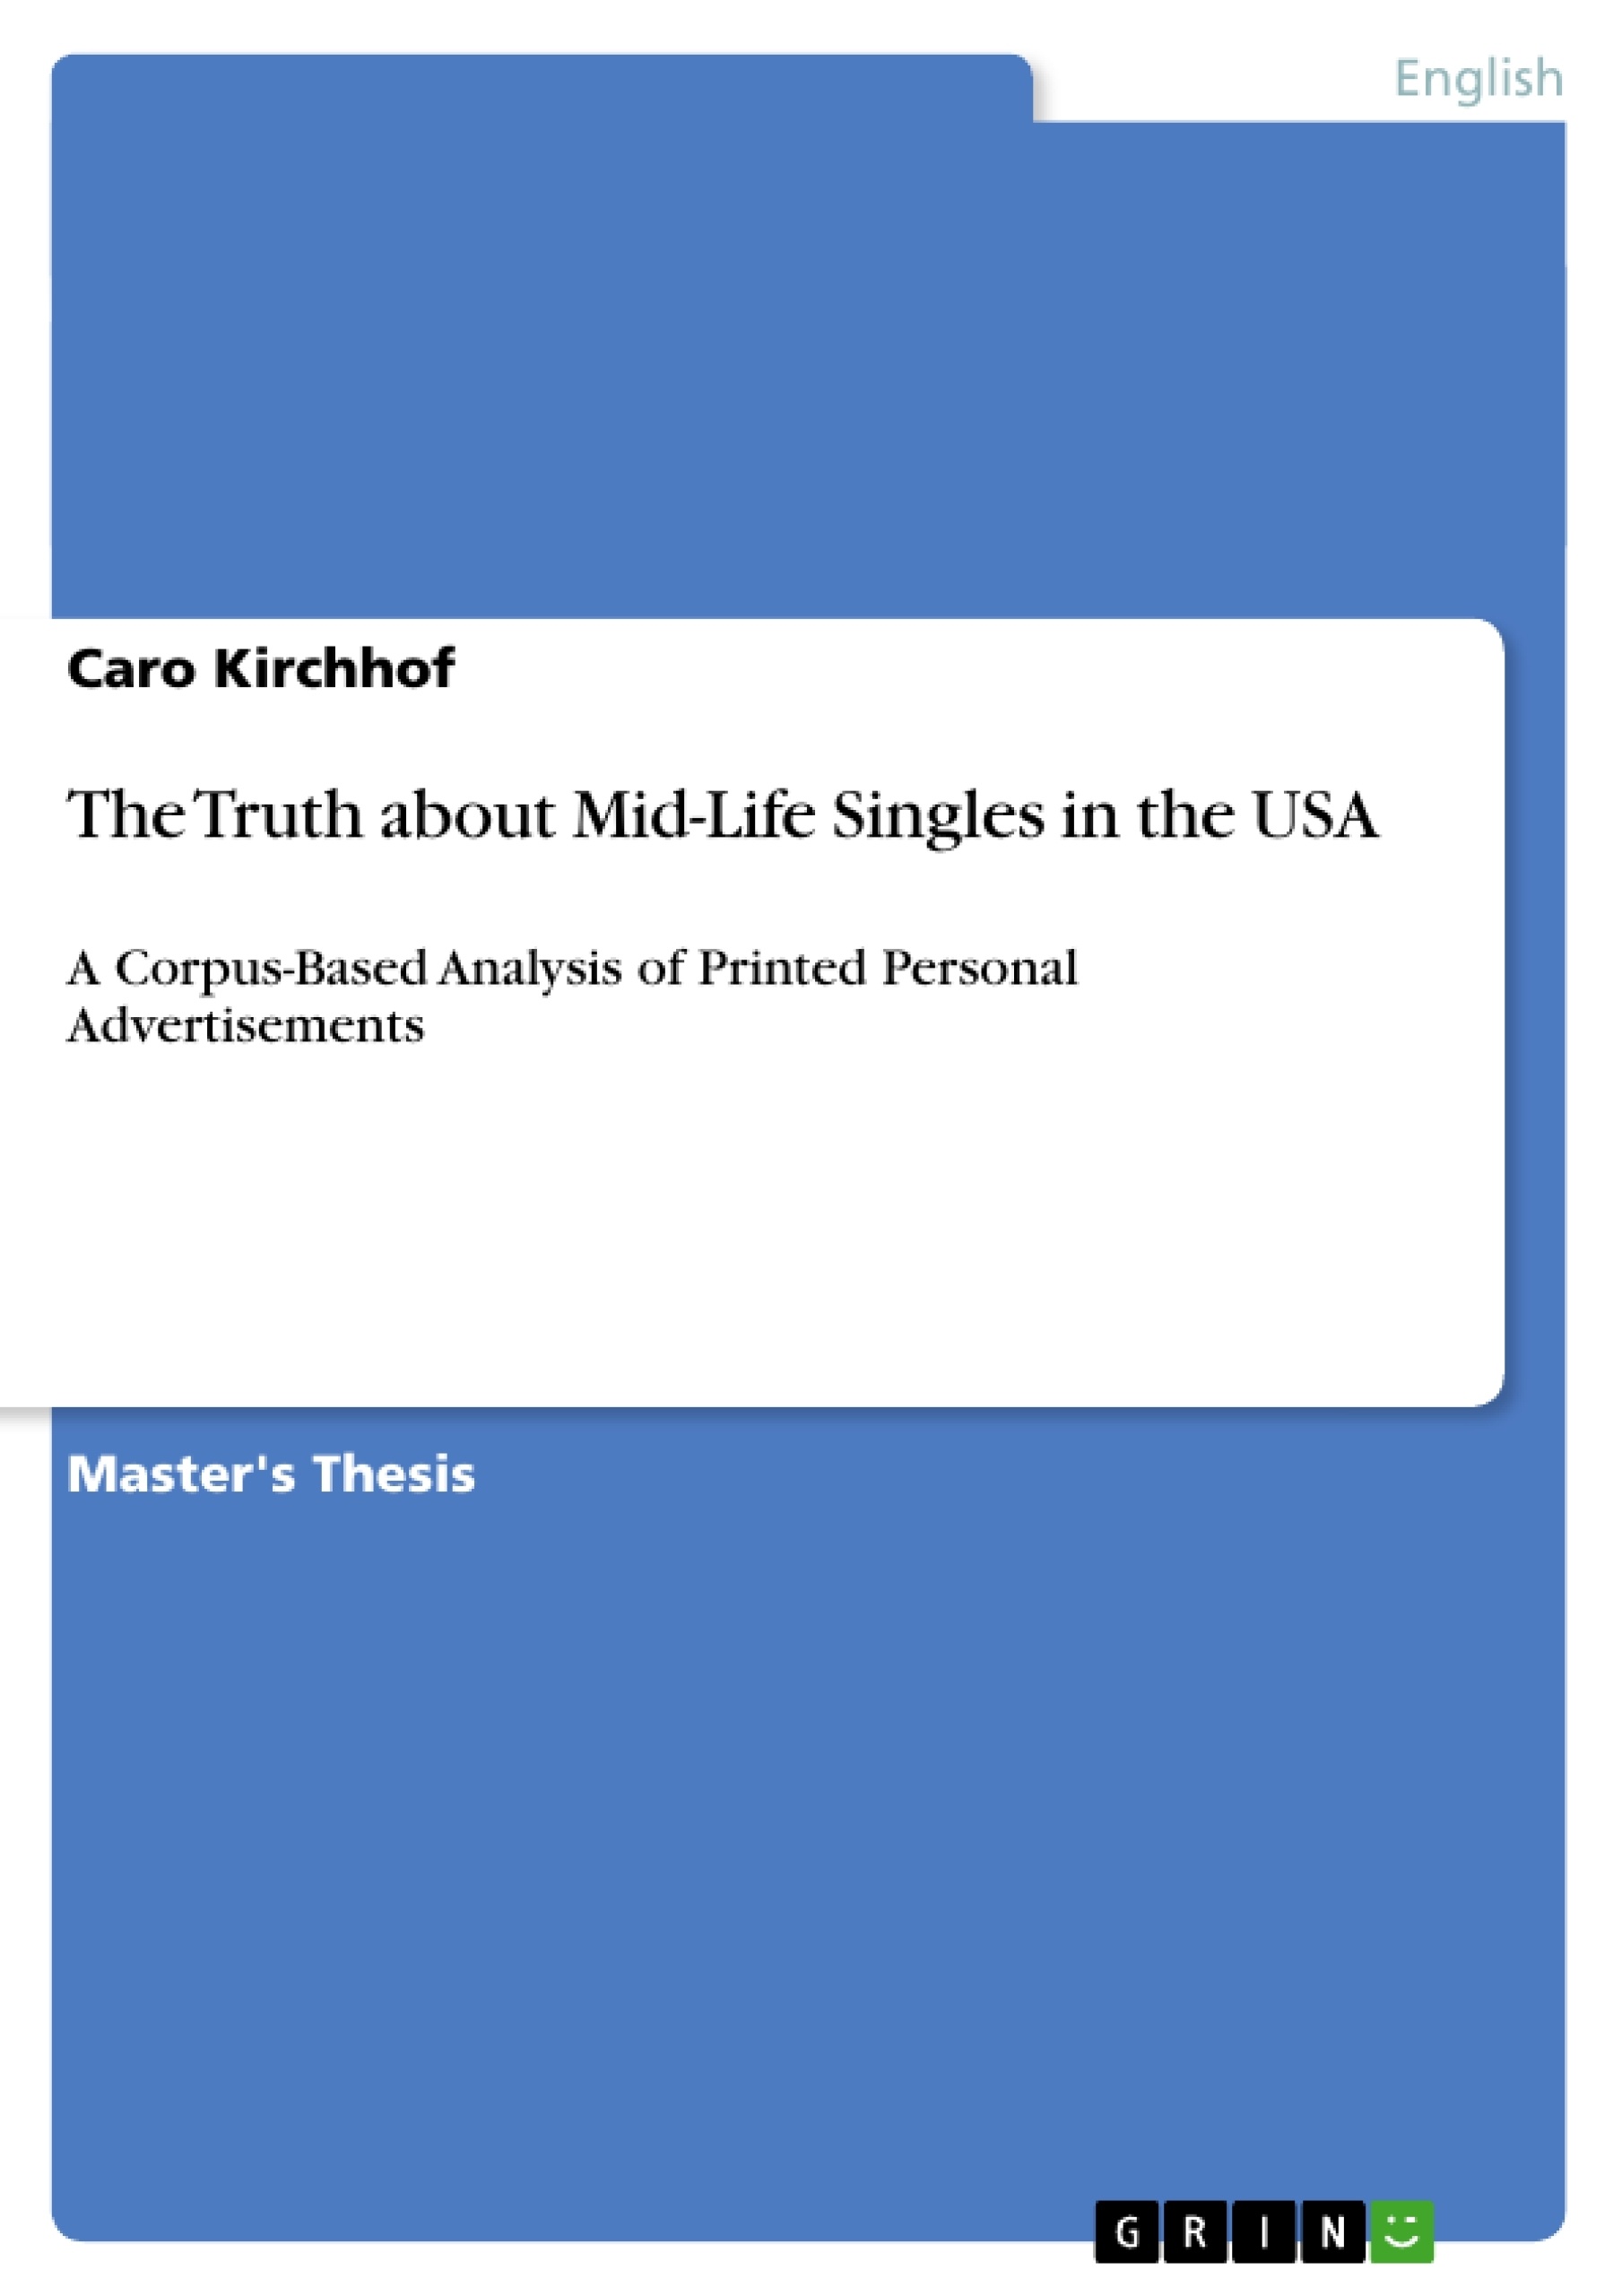 Titel: The Truth about Mid-Life Singles in the USA